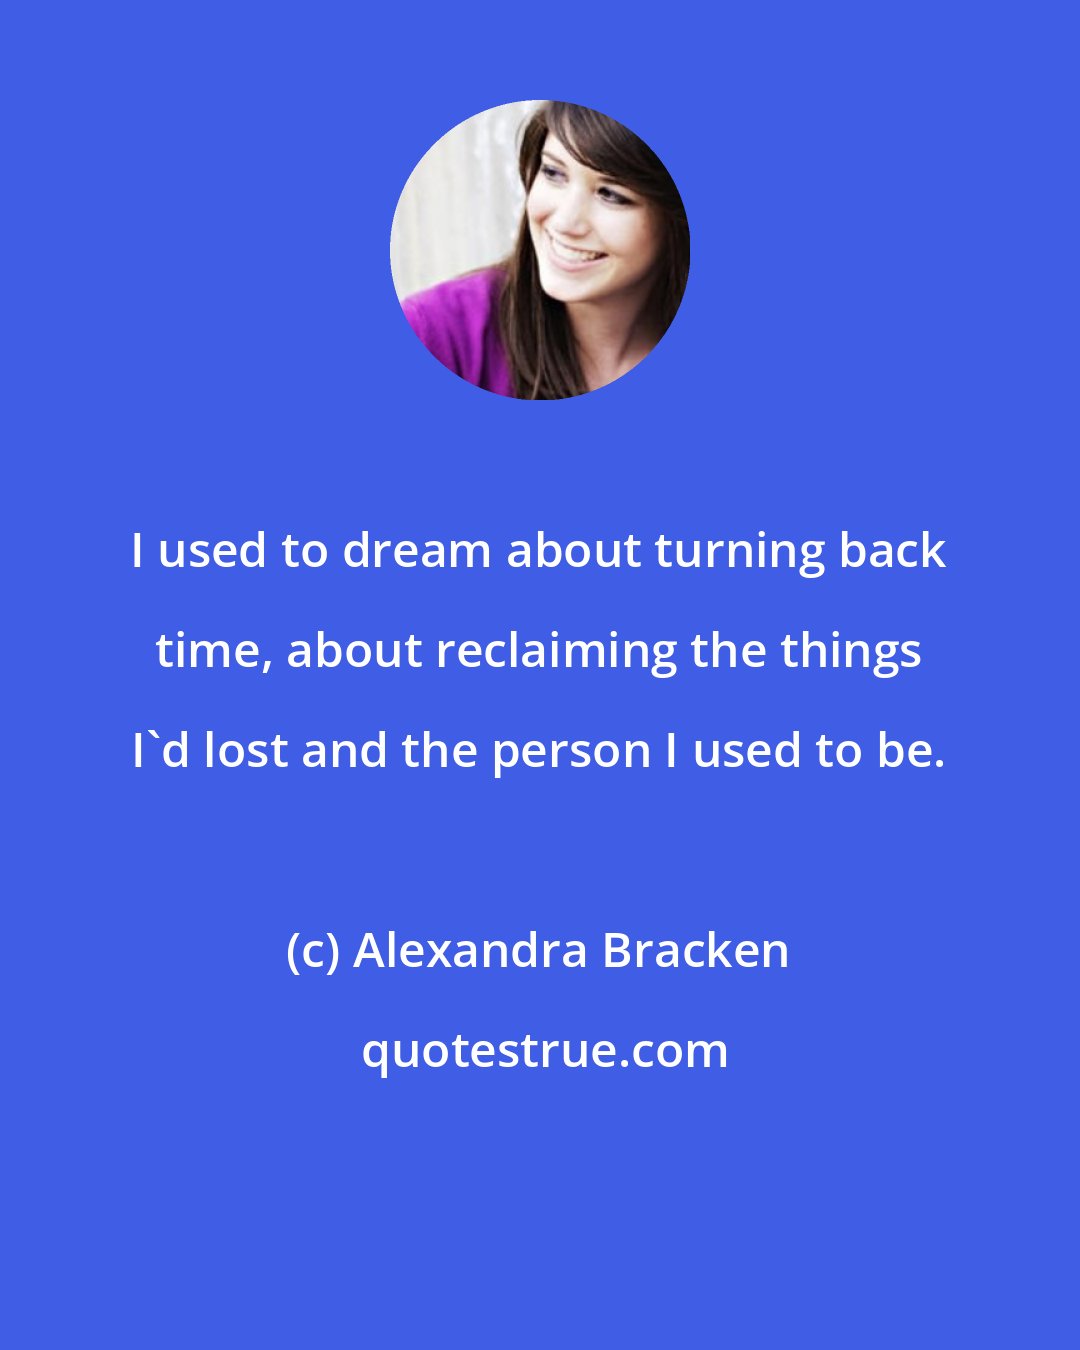 Alexandra Bracken: I used to dream about turning back time, about reclaiming the things I'd lost and the person I used to be.